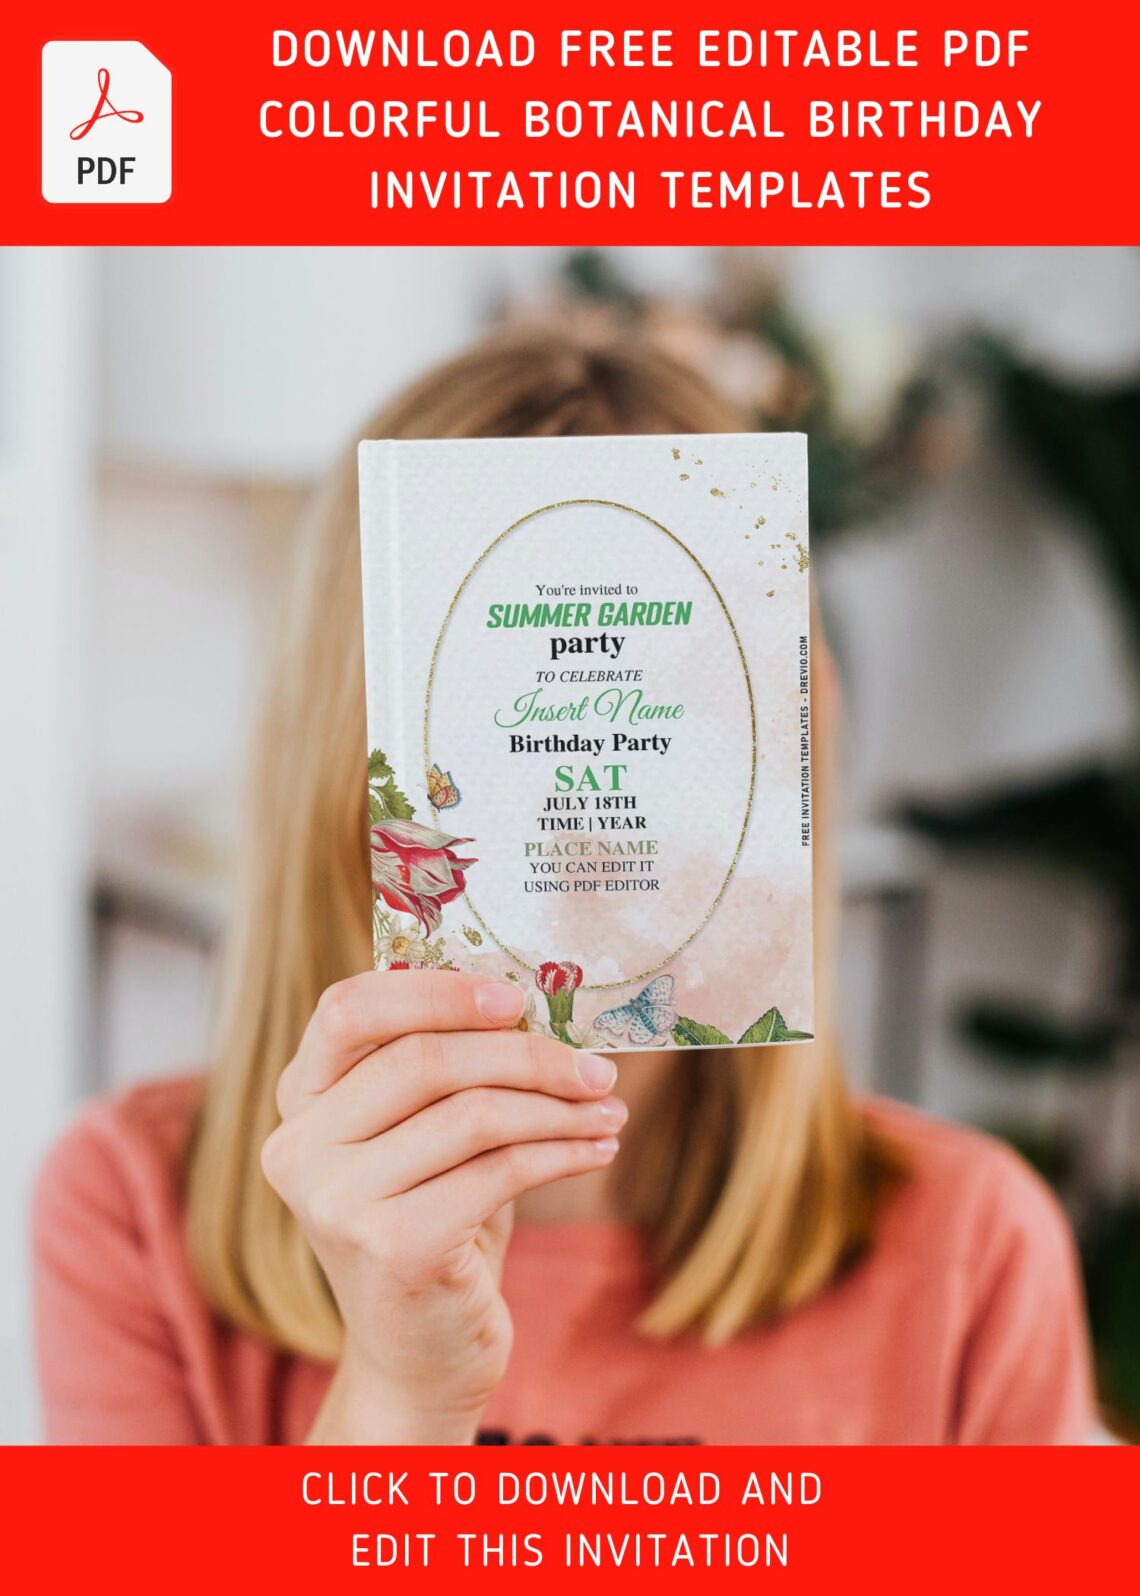 (Free Editable PDF) Botanical Wildflower Invitation Templates That You'll Love Forever with magical butterflies and stunning floral decoration